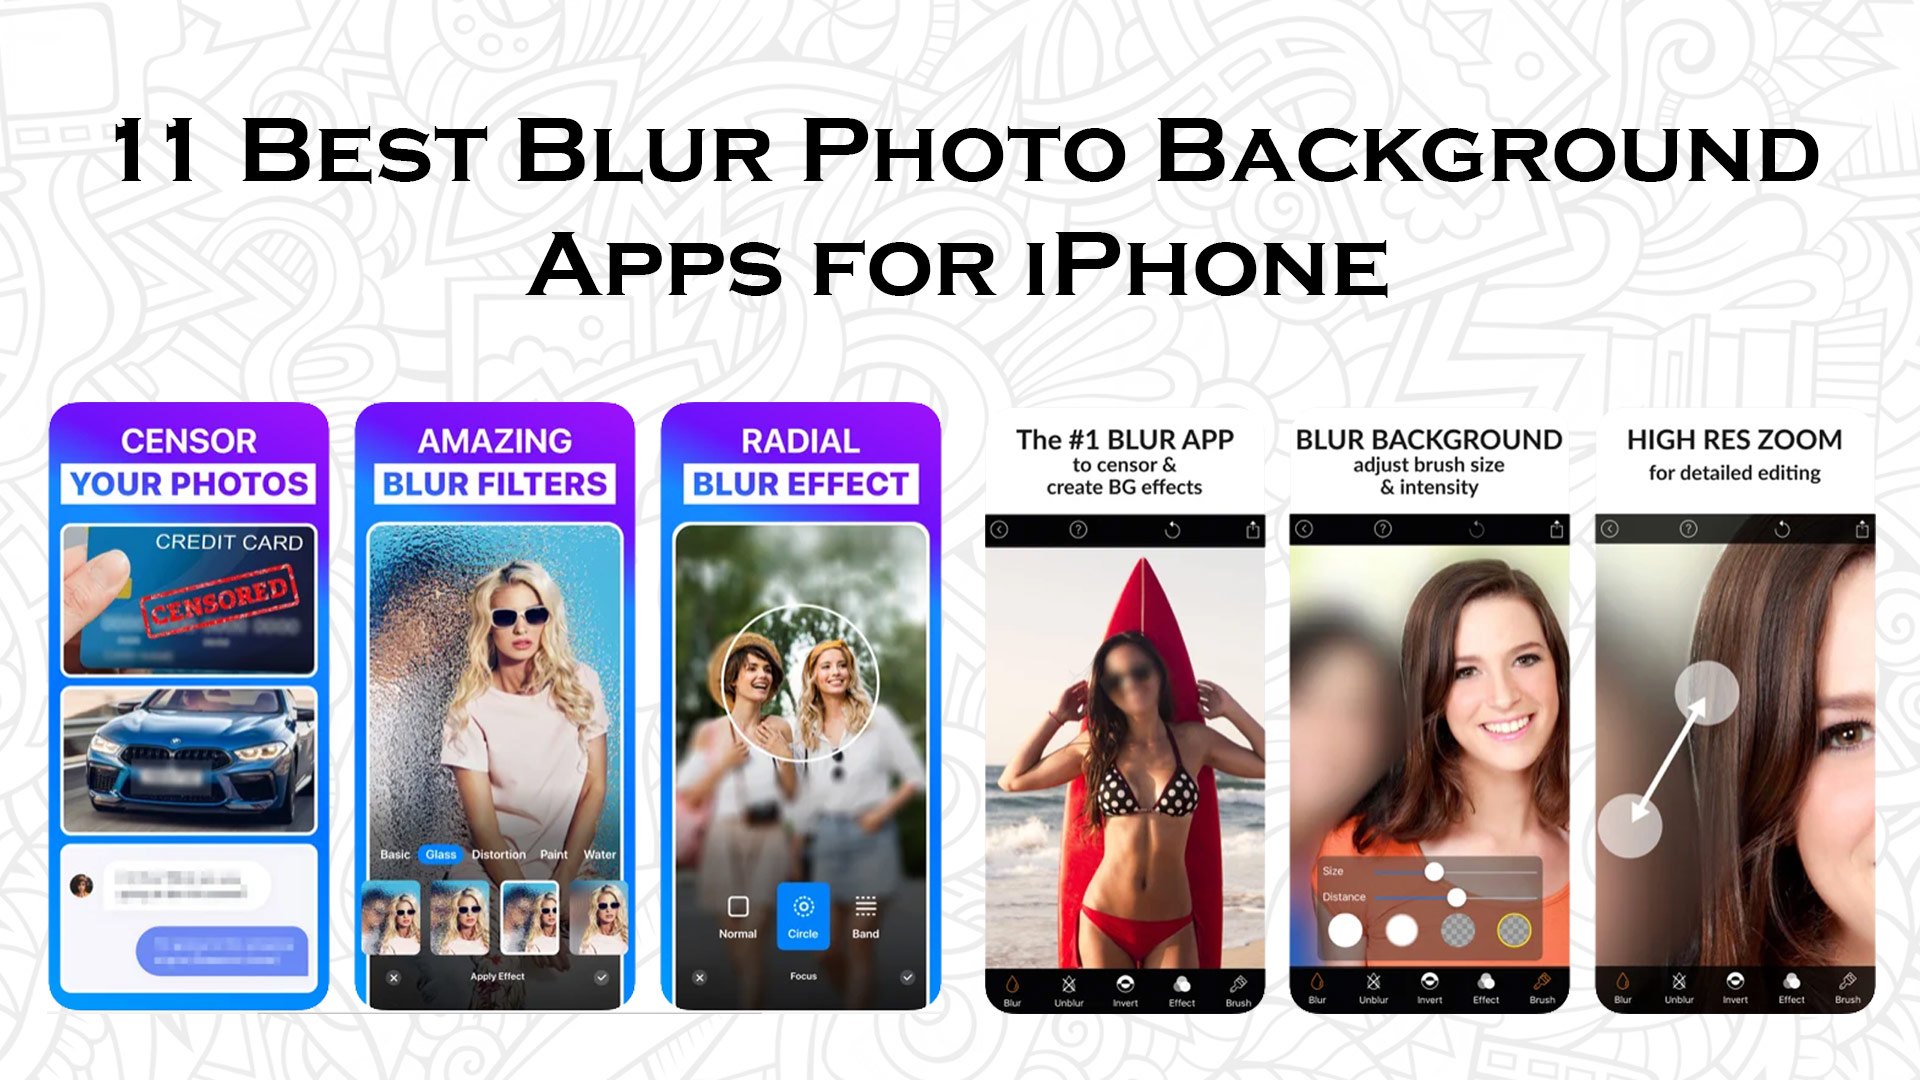 11 Best Blur Photo Background Apps for iPhone